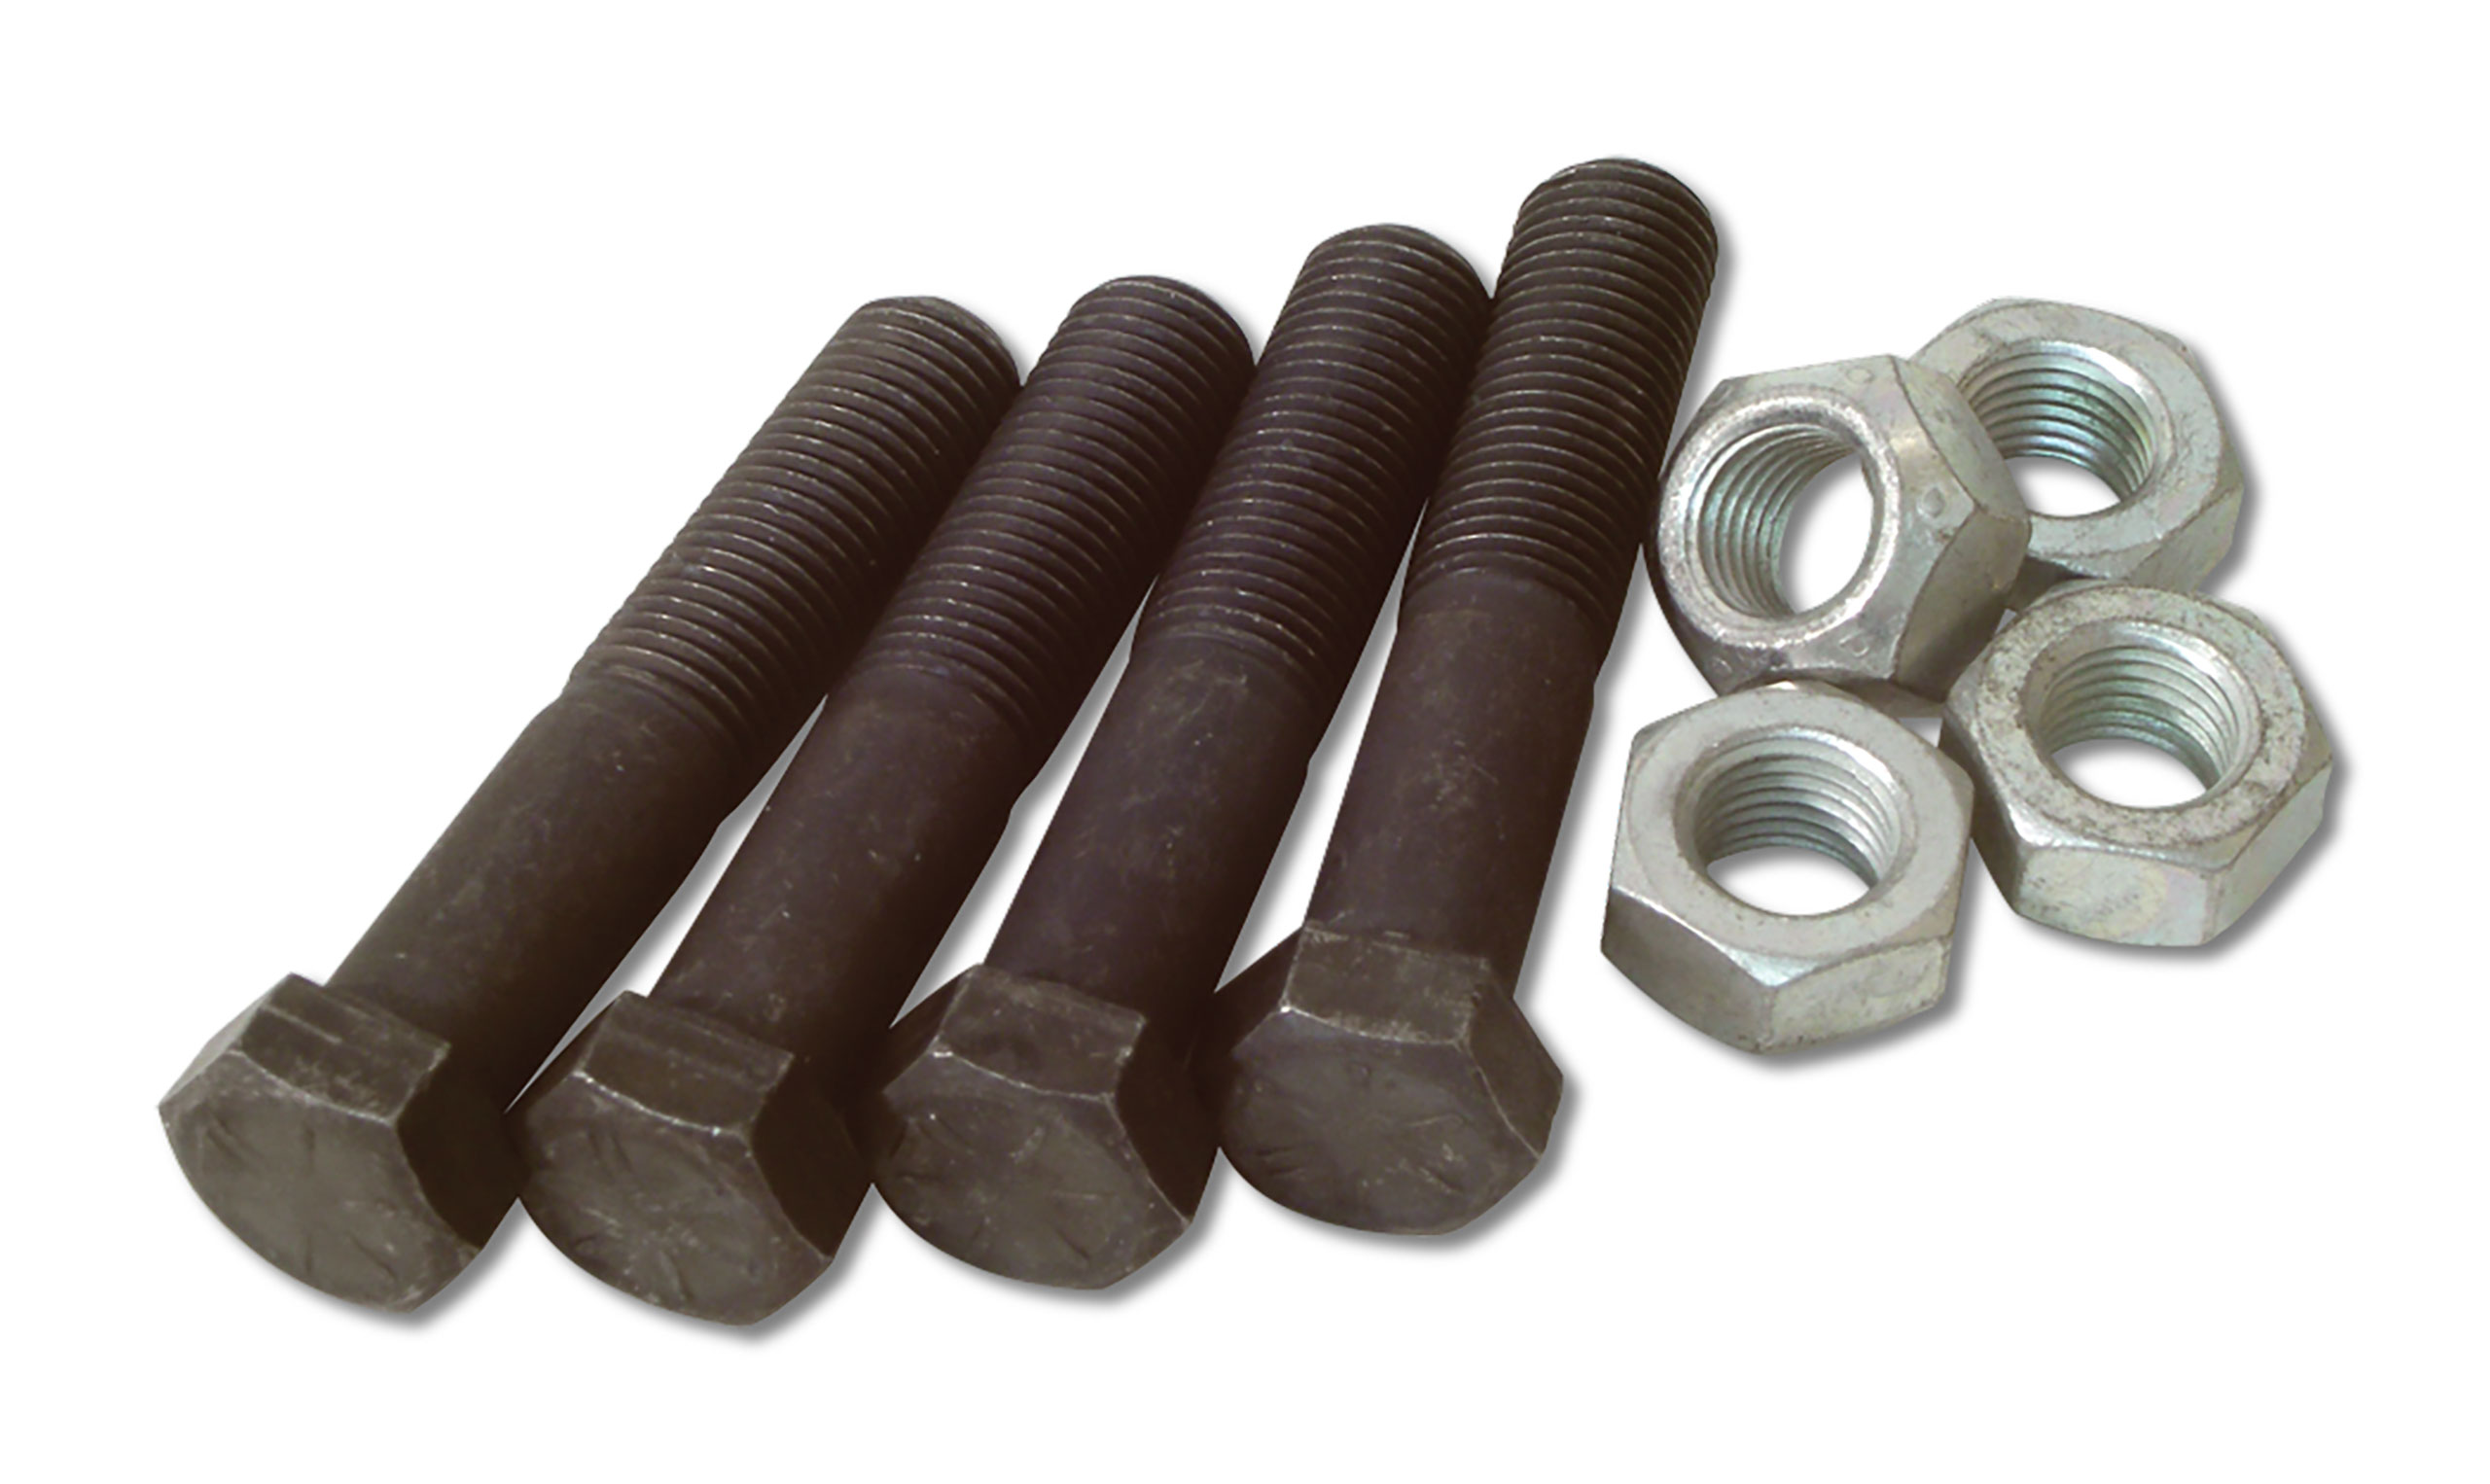 Auto Accessories of America 1965-1968 Chevrolet Corvette Front Spindle/Steering Knuckle Bolt Kit.